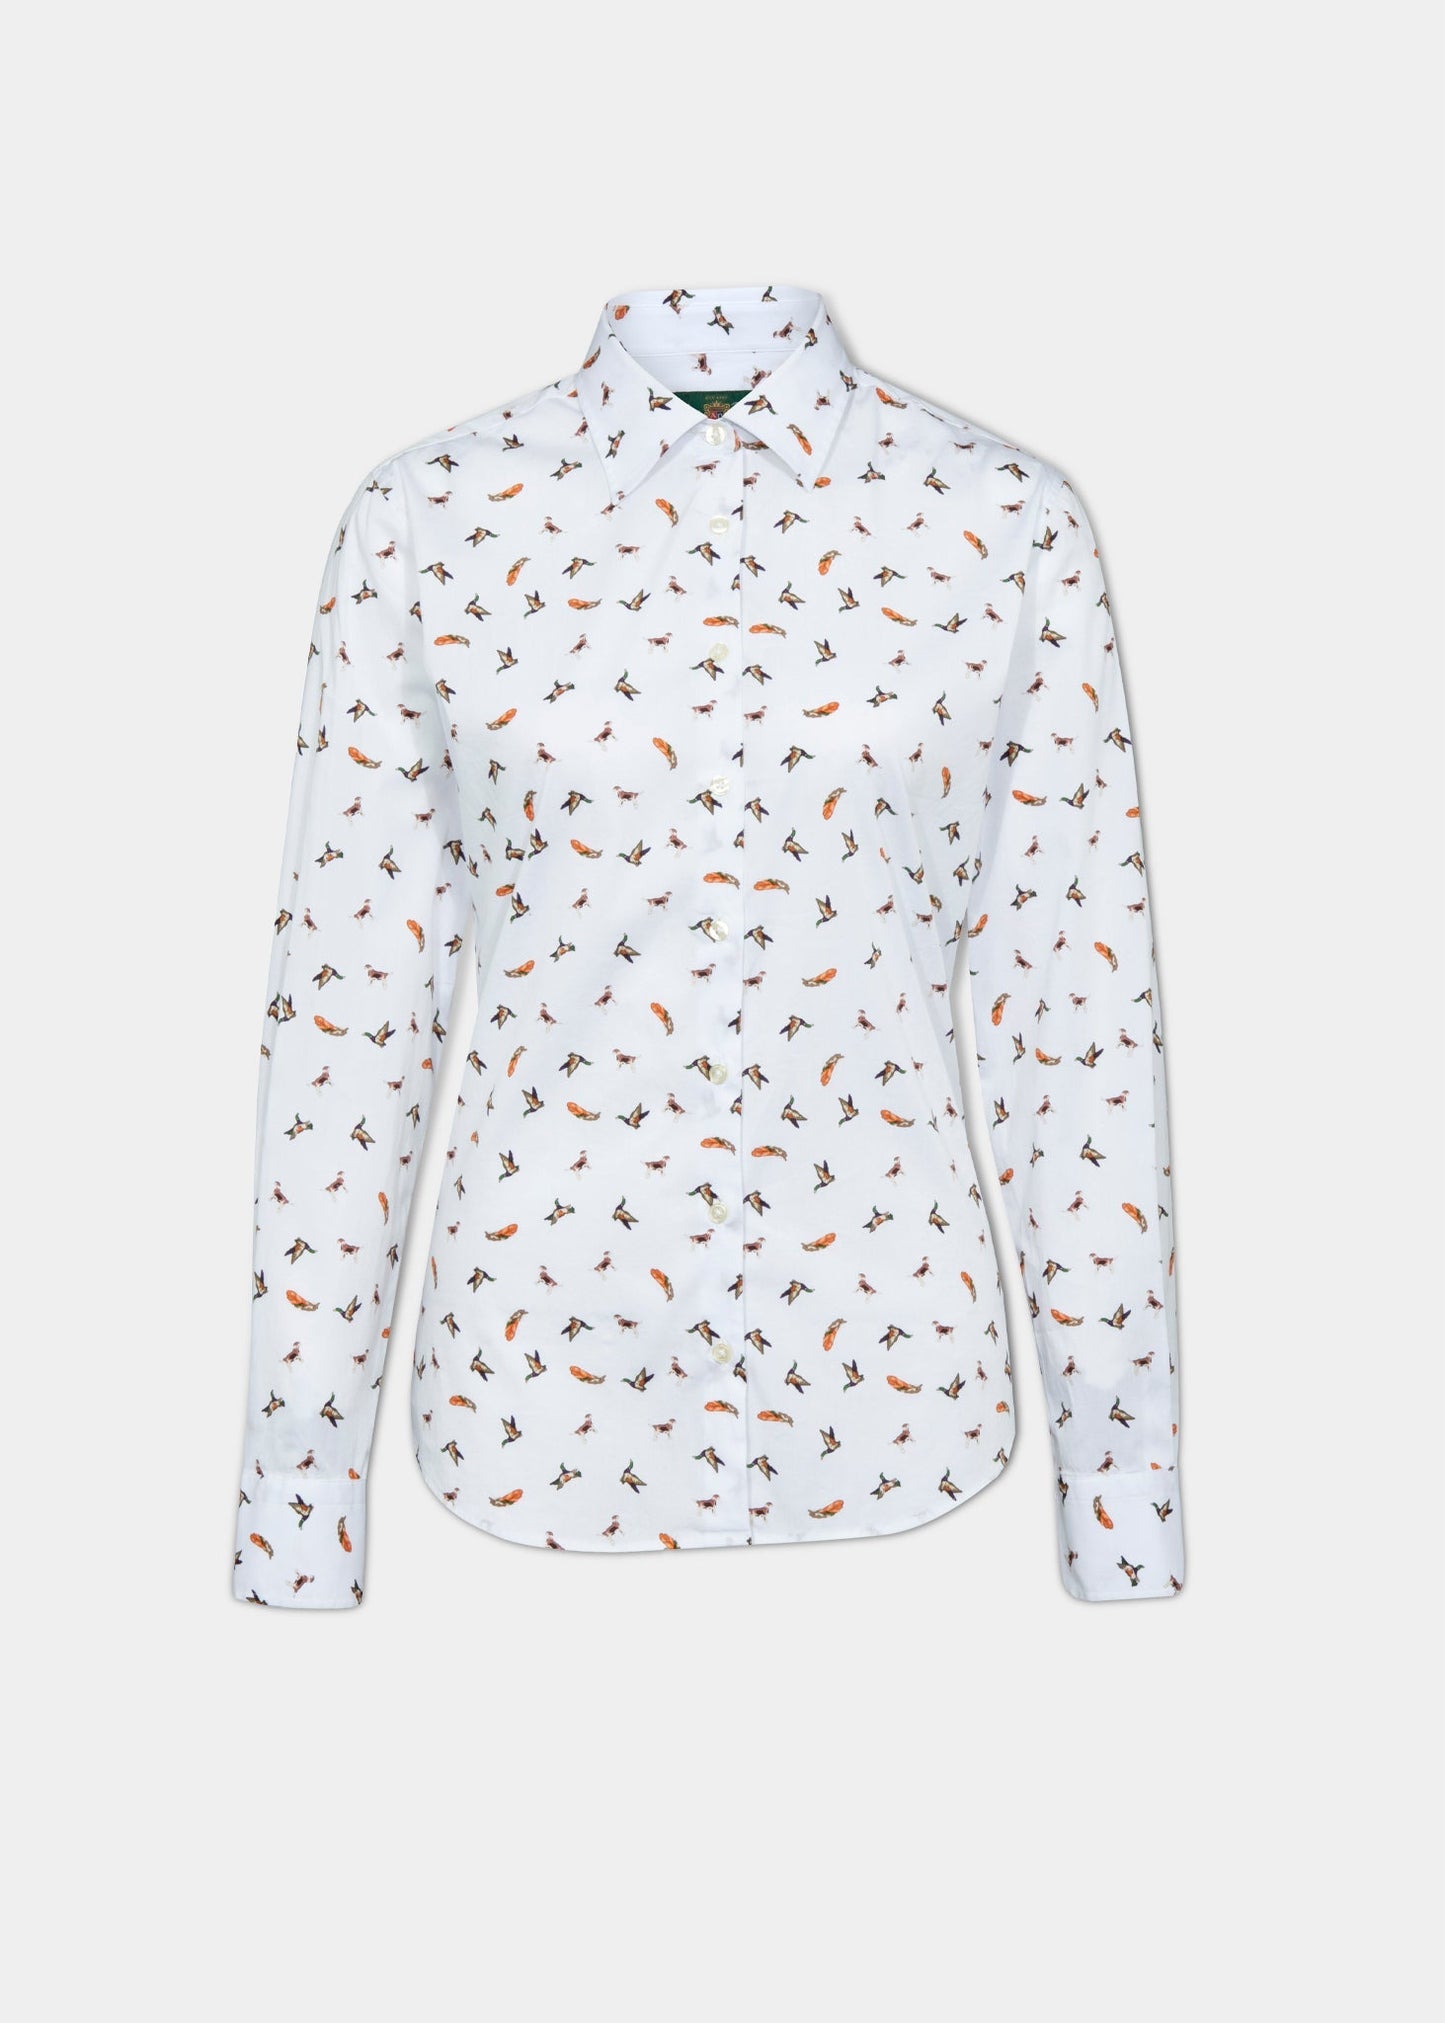 ladies-printed-cotton-country-shirt-dog-duck-design